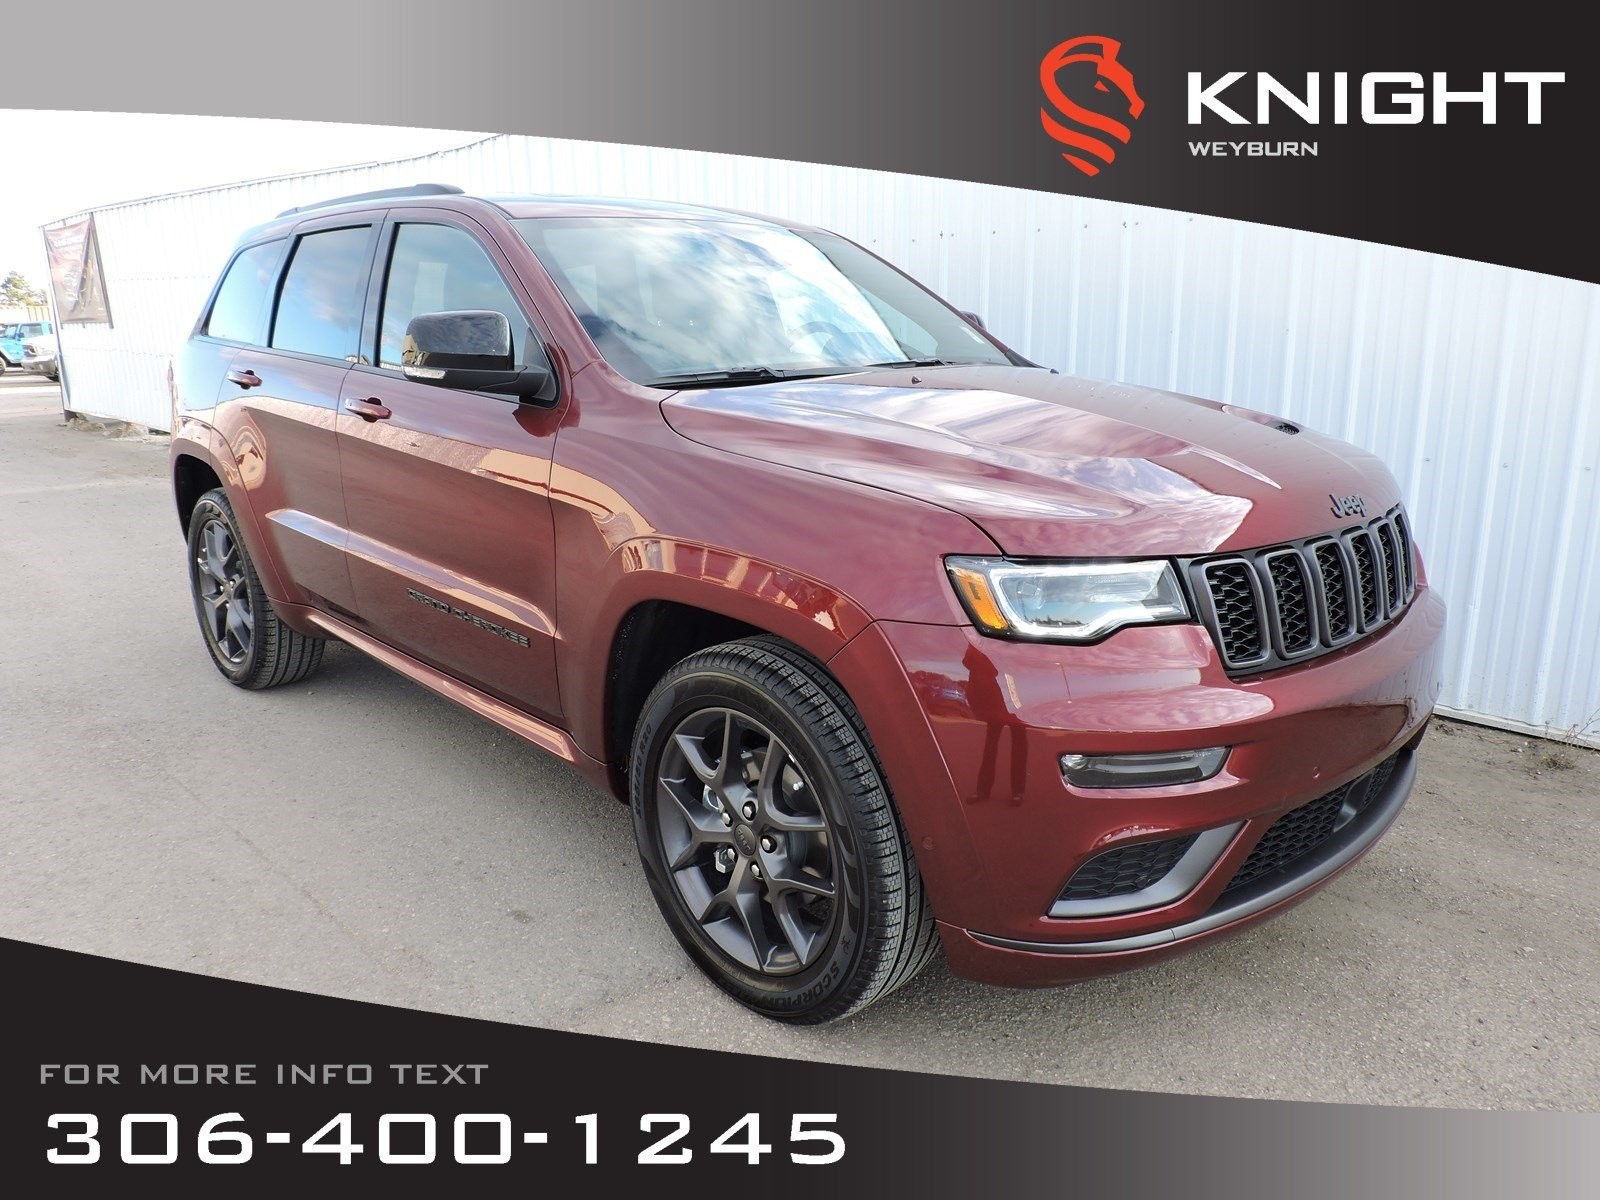 2005 Jeep Grand Cherokee Radio Wiring New 2020 Jeep Grand Cherokee Limited X 4×4 Heritage Leather Seats Navigation Panoramic Sunroof Back Up Camera Of 2005 Jeep Grand Cherokee Radio Wiring